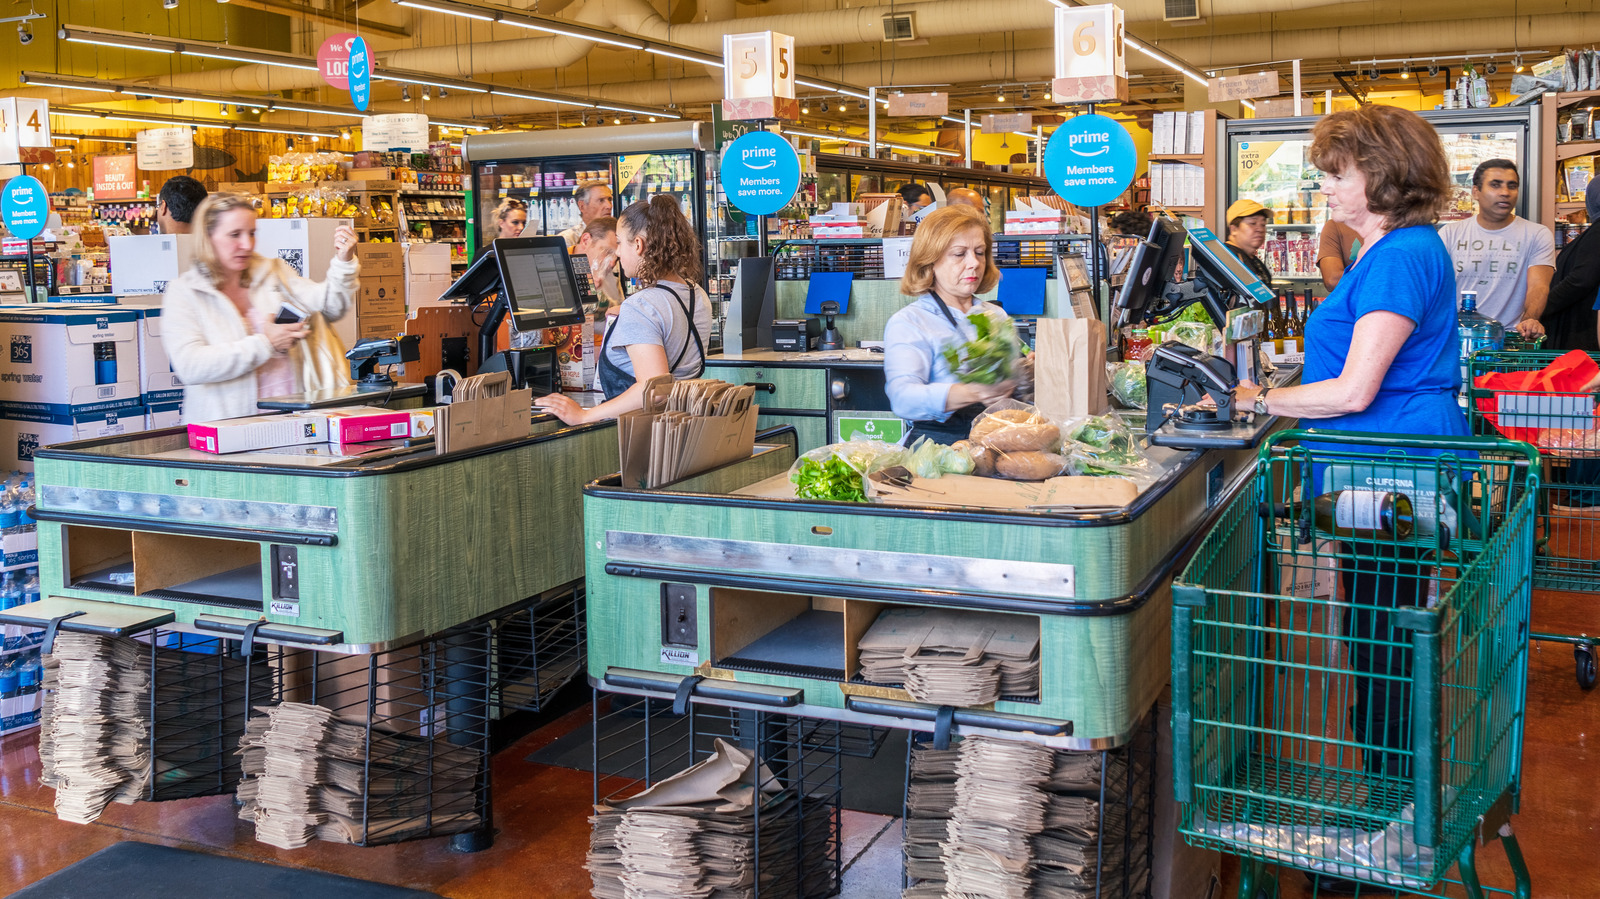 Whole Foods Checkout System Is About To Make An Unusual Change